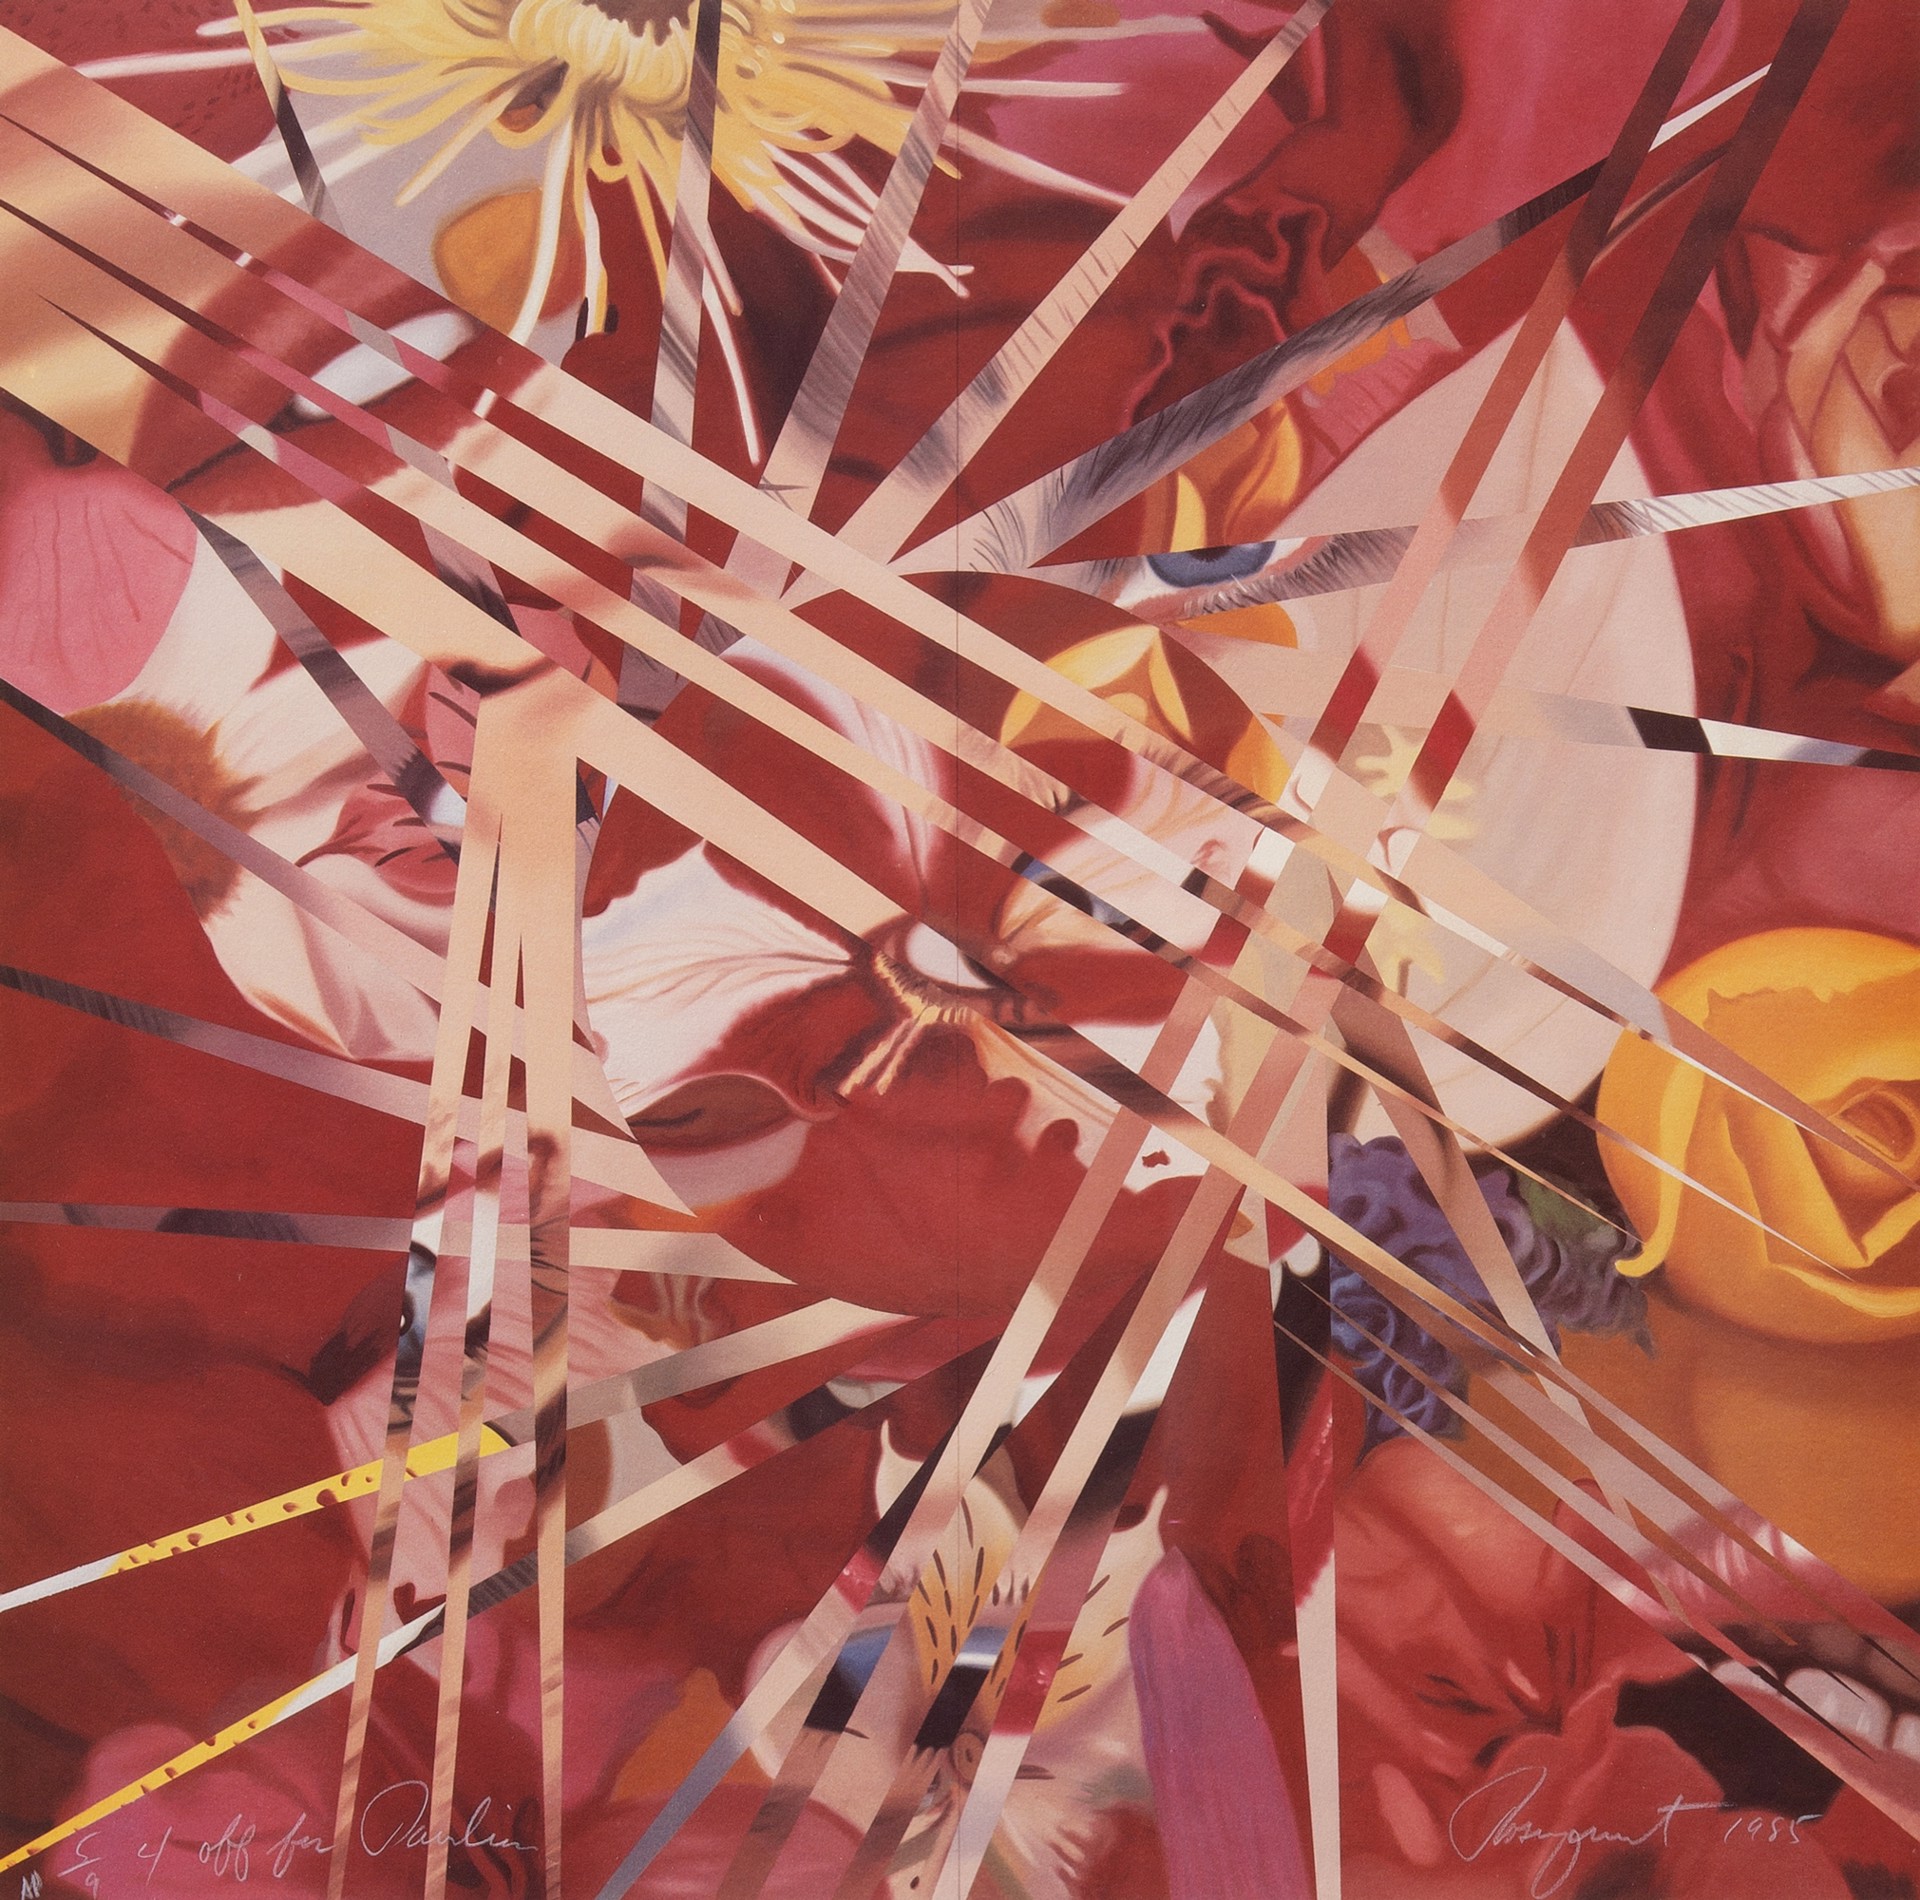 4 Off for Pavilion by James Rosenquist